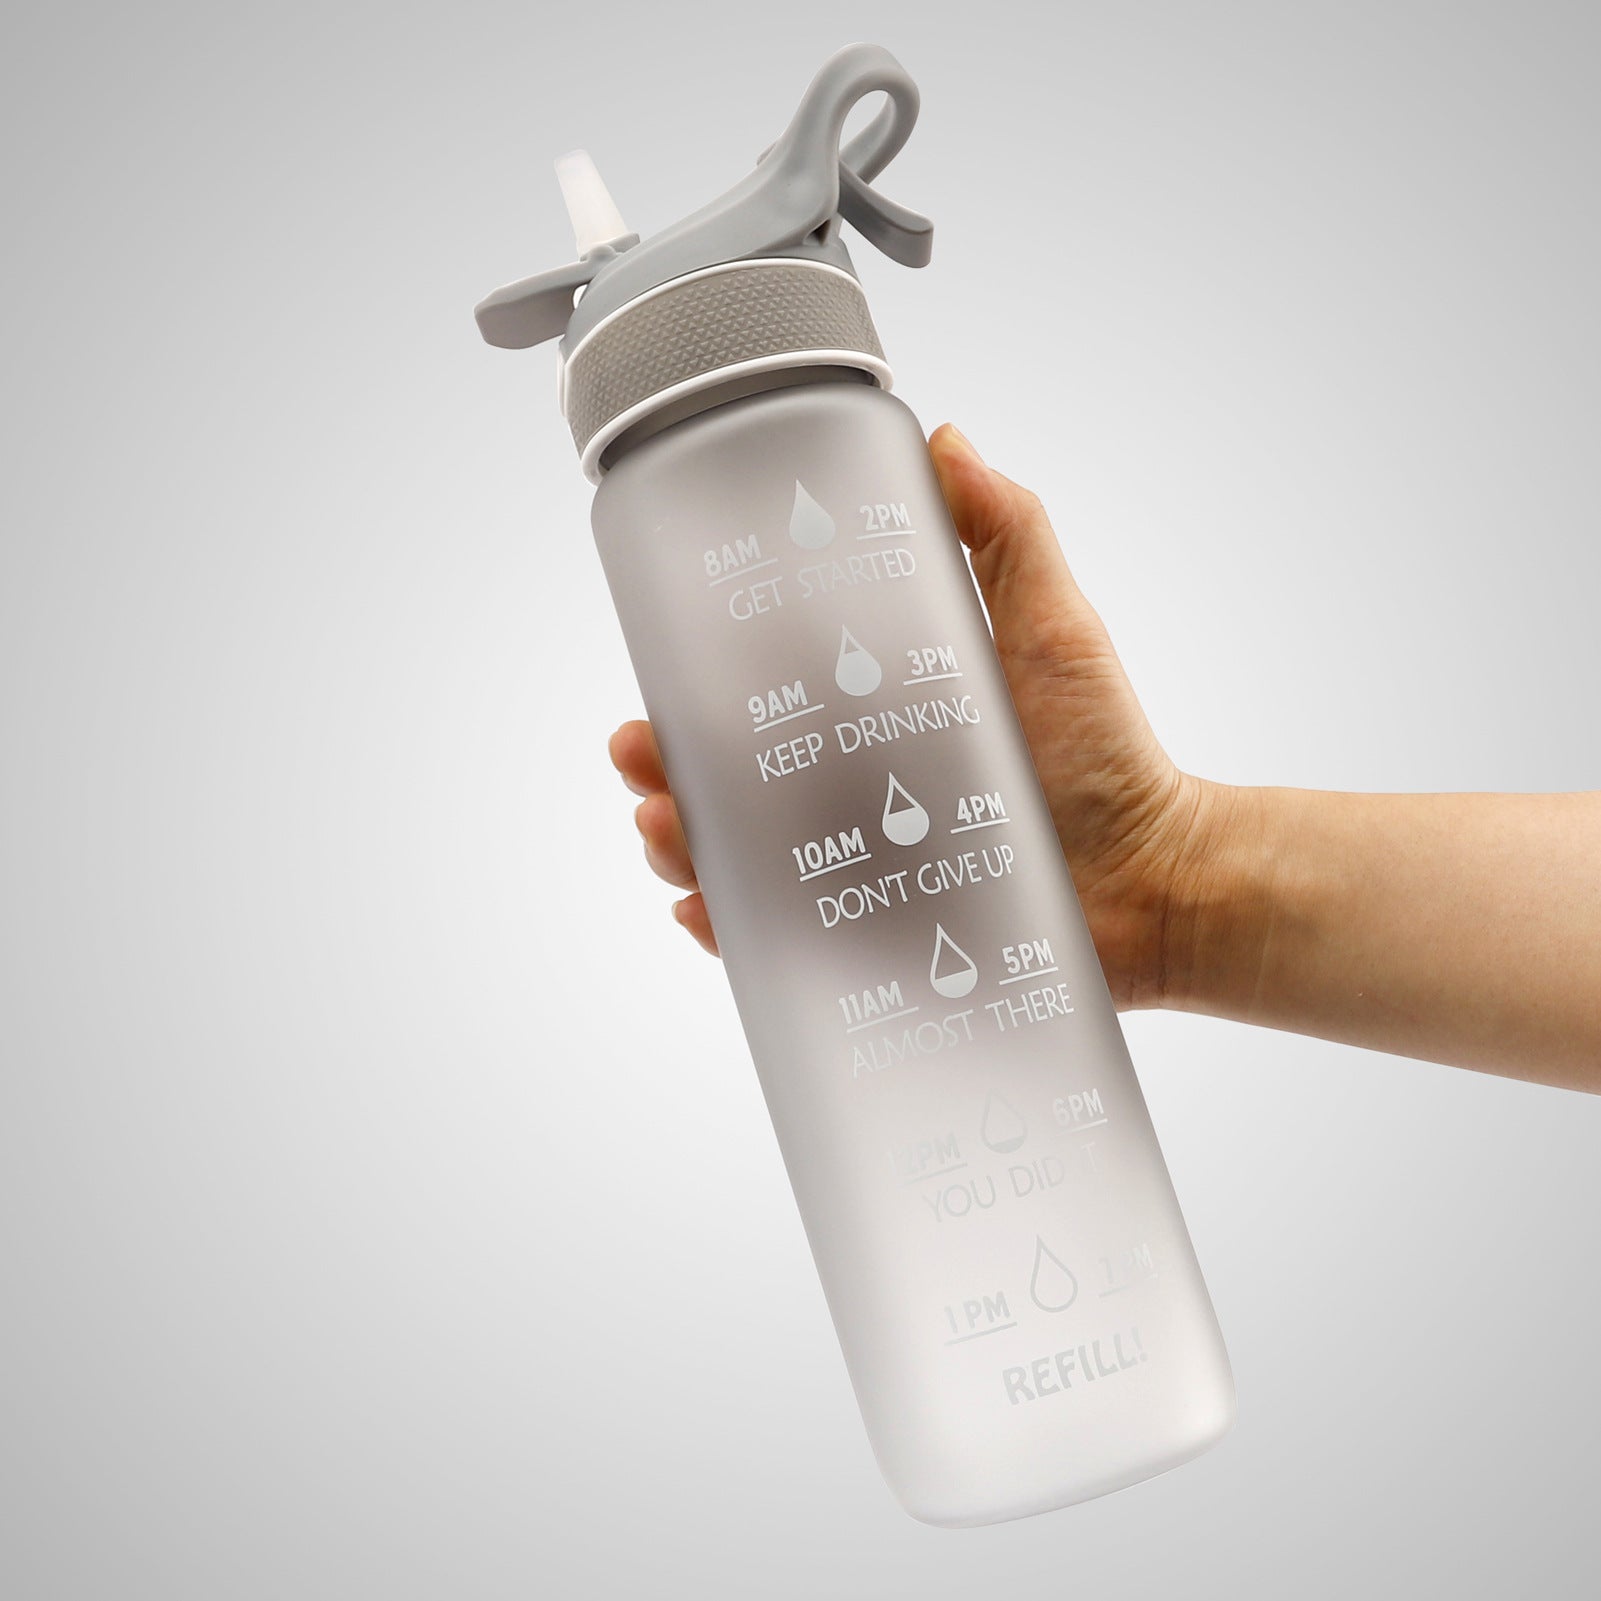 AquaQuench Bottle: Fitness Hydration Innovated - Shipfound